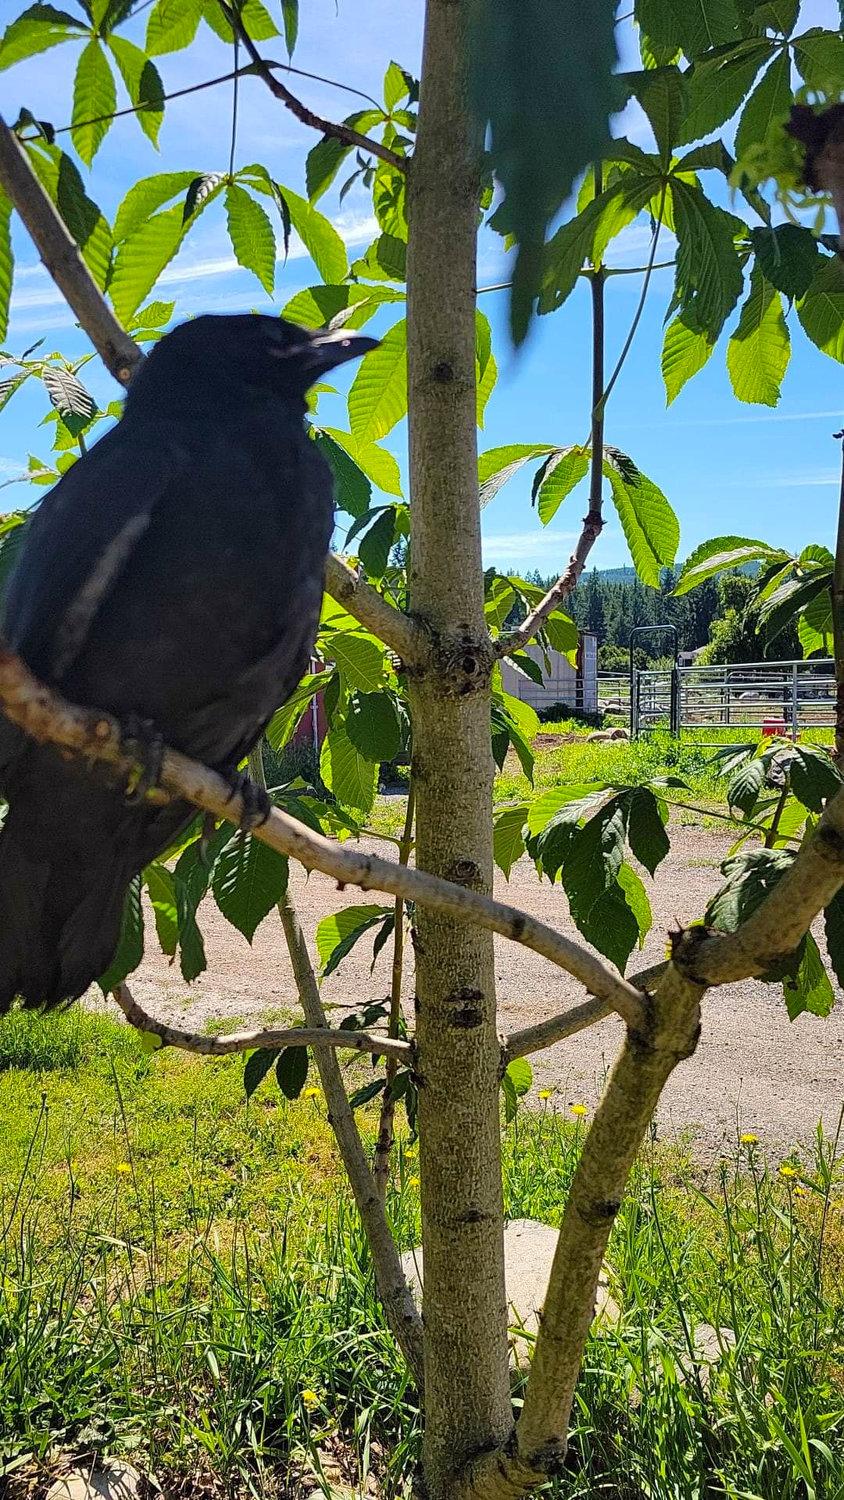 "Mr. Snow" the crow perches on a tree at rescuer John Wilson's residence in Rainier. Wilson found the bird in the wild and nursed it back to health from an unresponsive state.